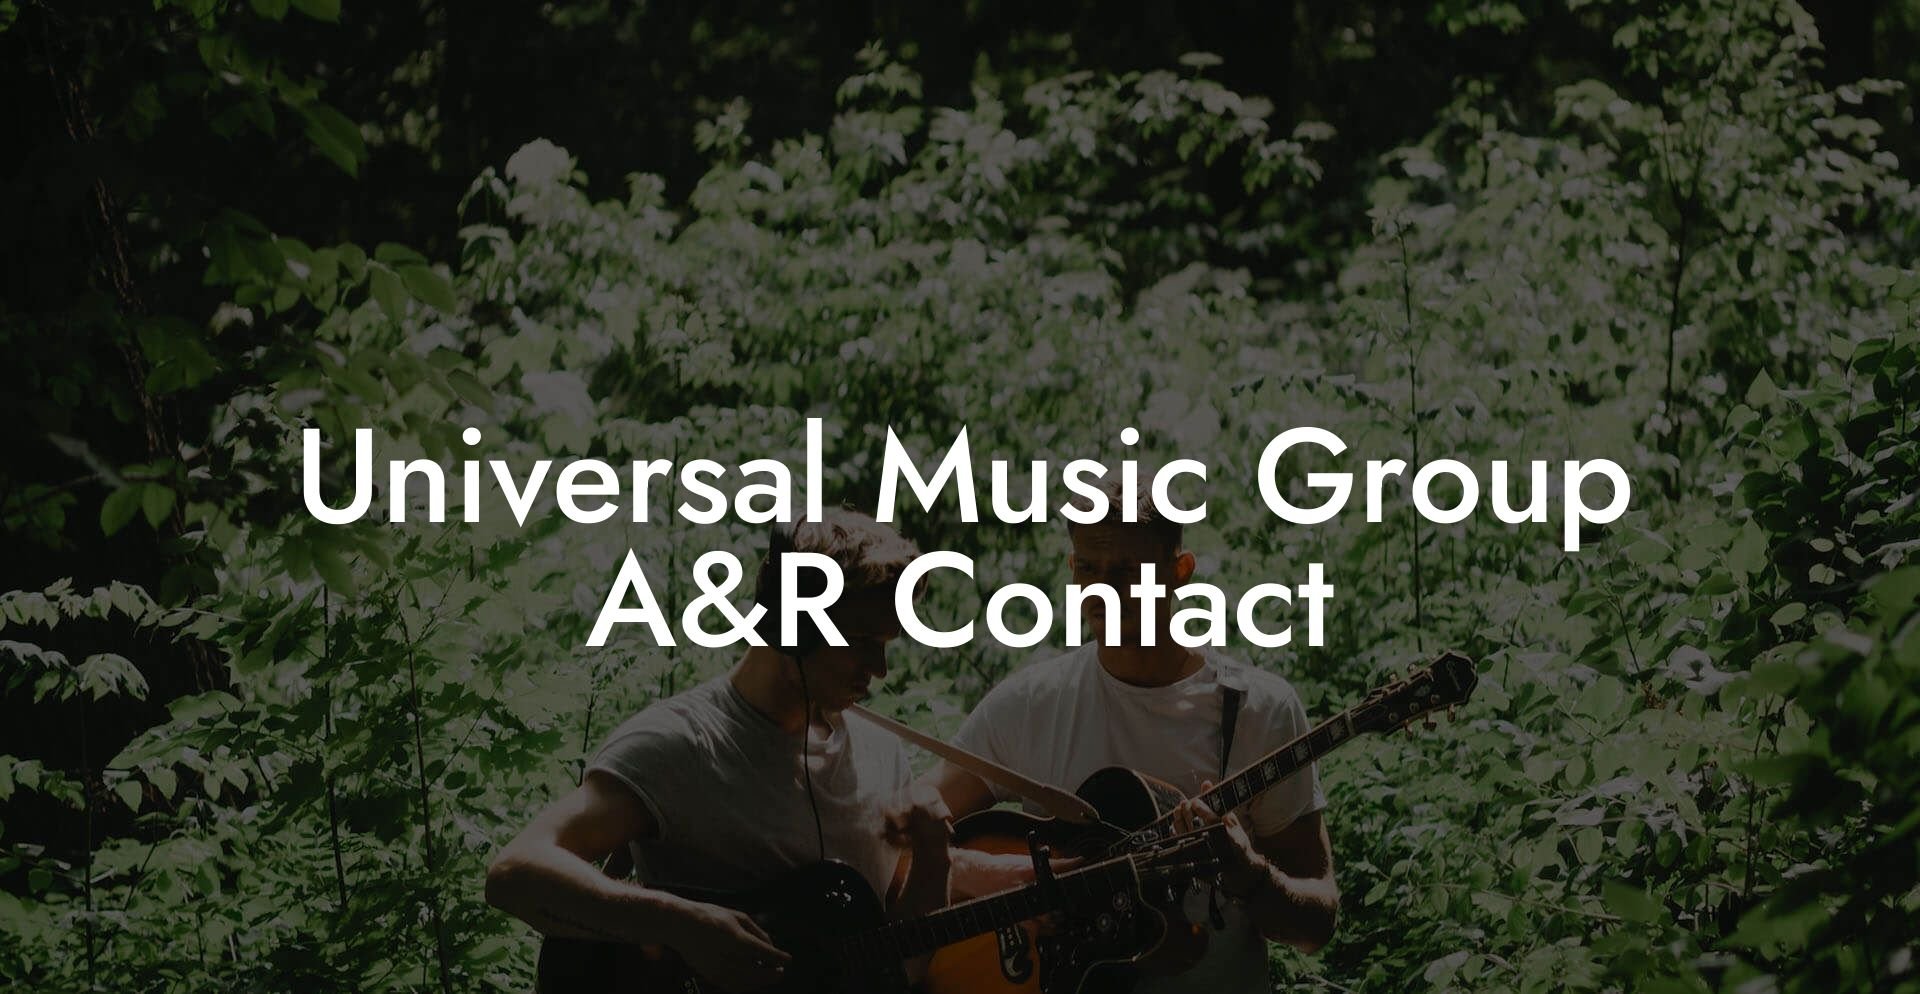 Universal Music Group A&R Contact